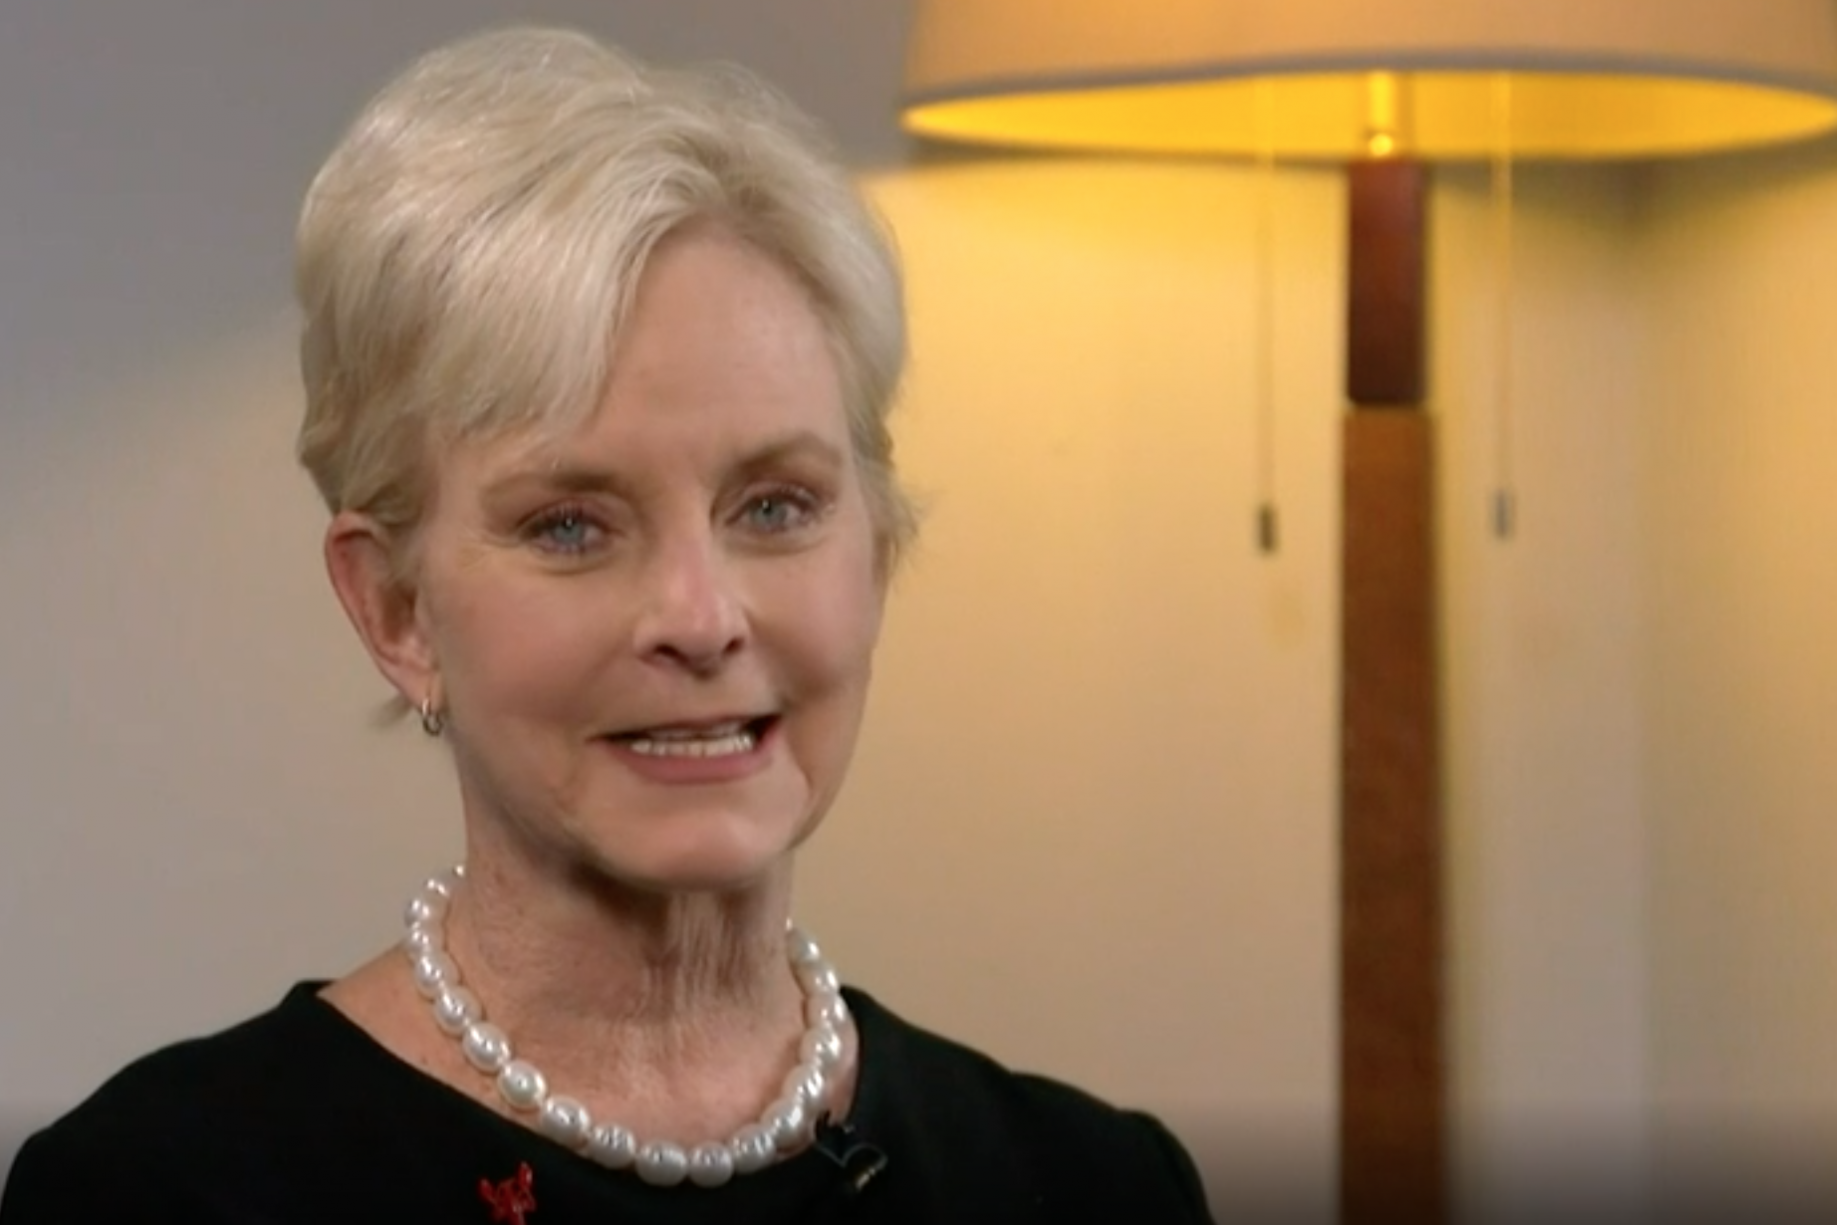 Cindy McCain said she would take the censure as a badge of honour.